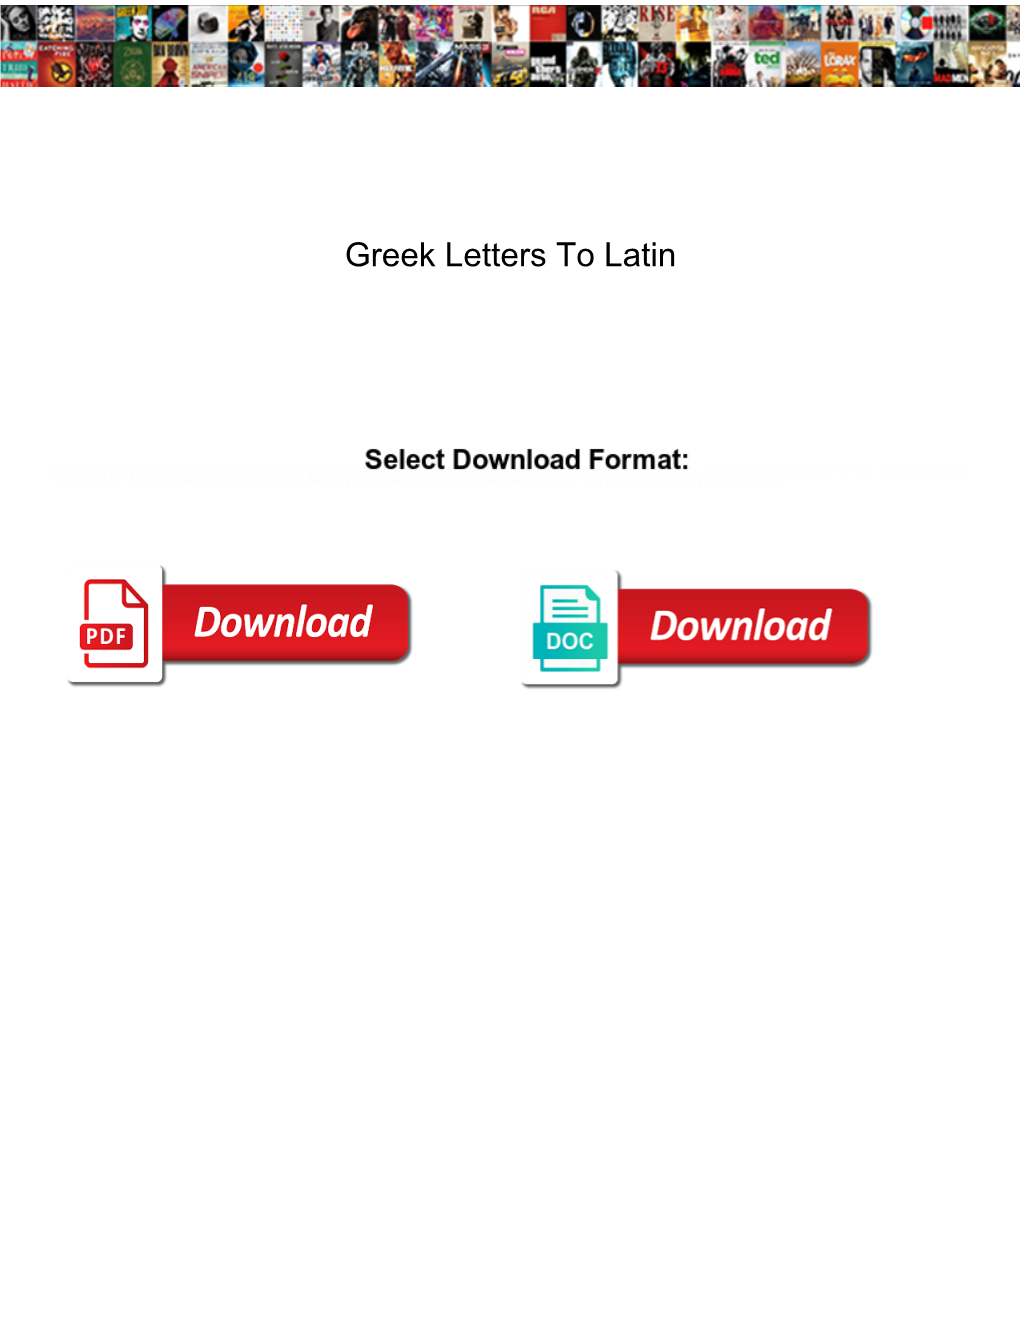 Greek Letters to Latin